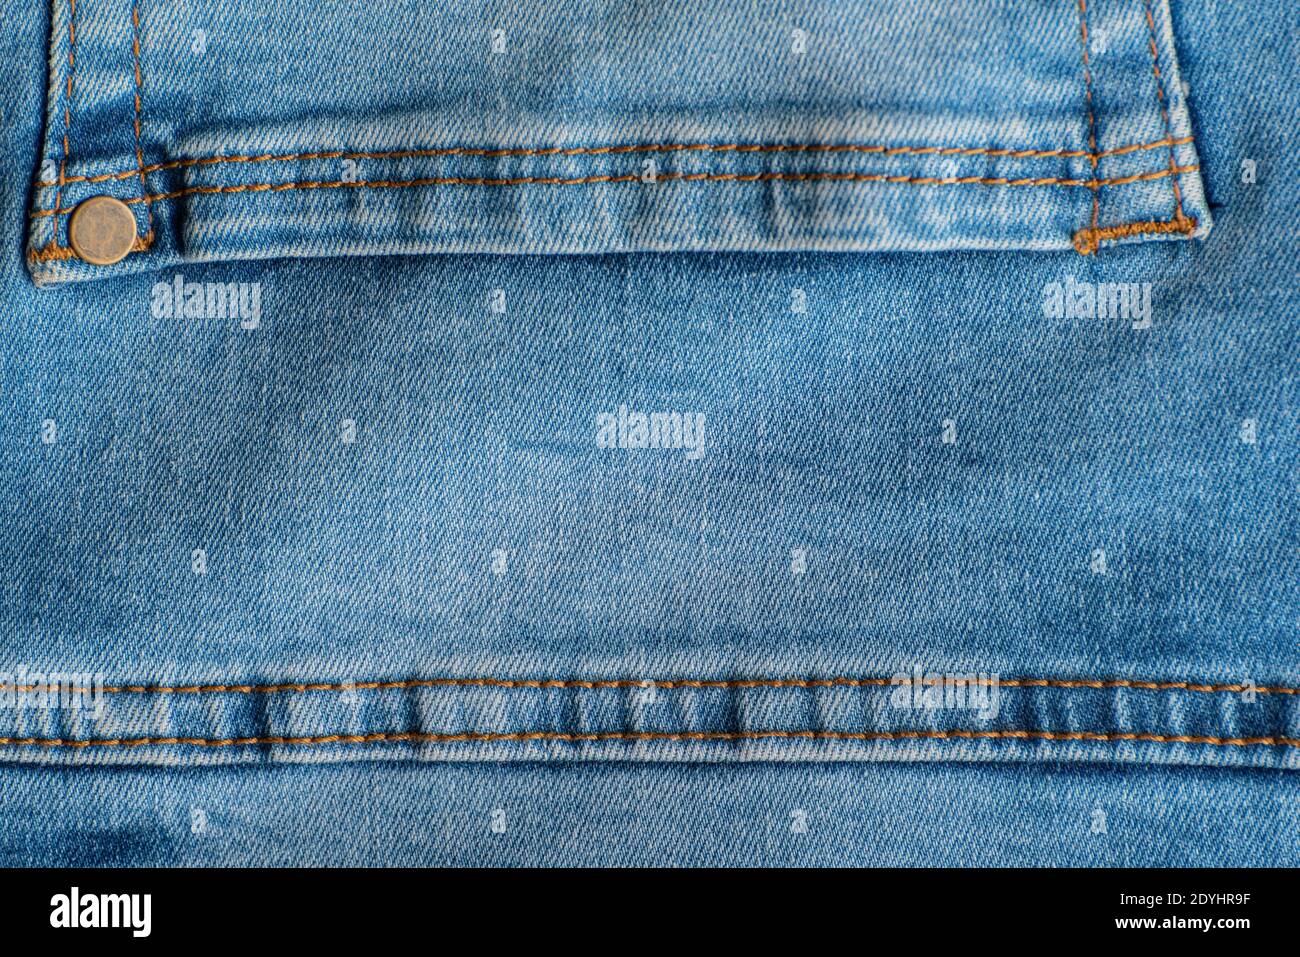 jeans without rivets